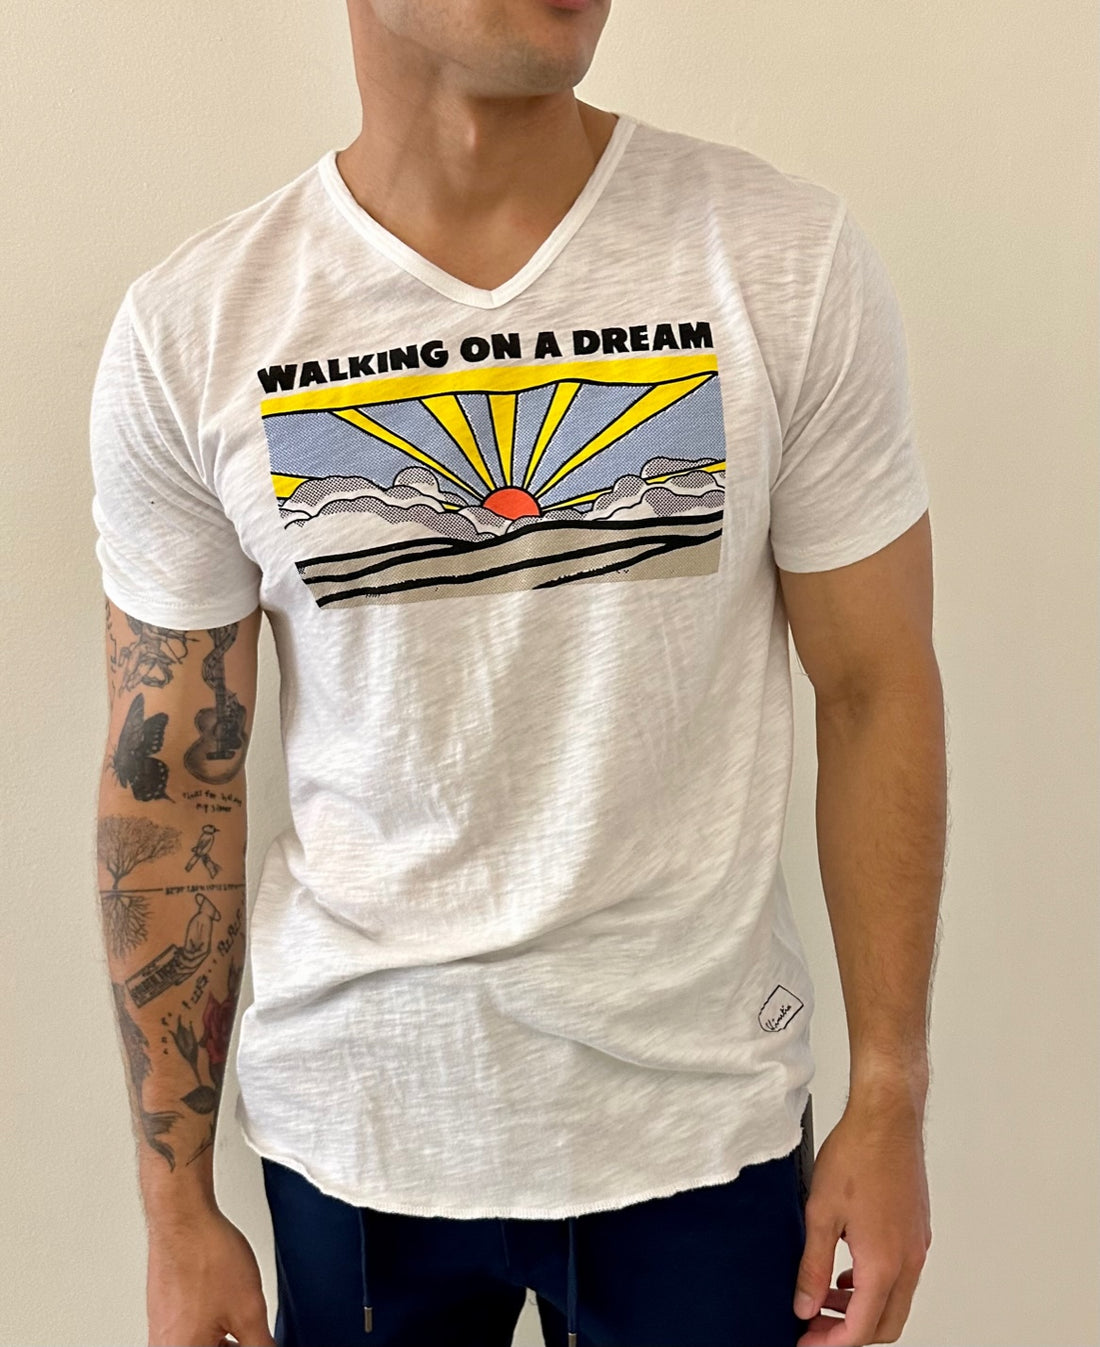 "WALKING ON A DREAM" on our 4 Corners Vneck (White)